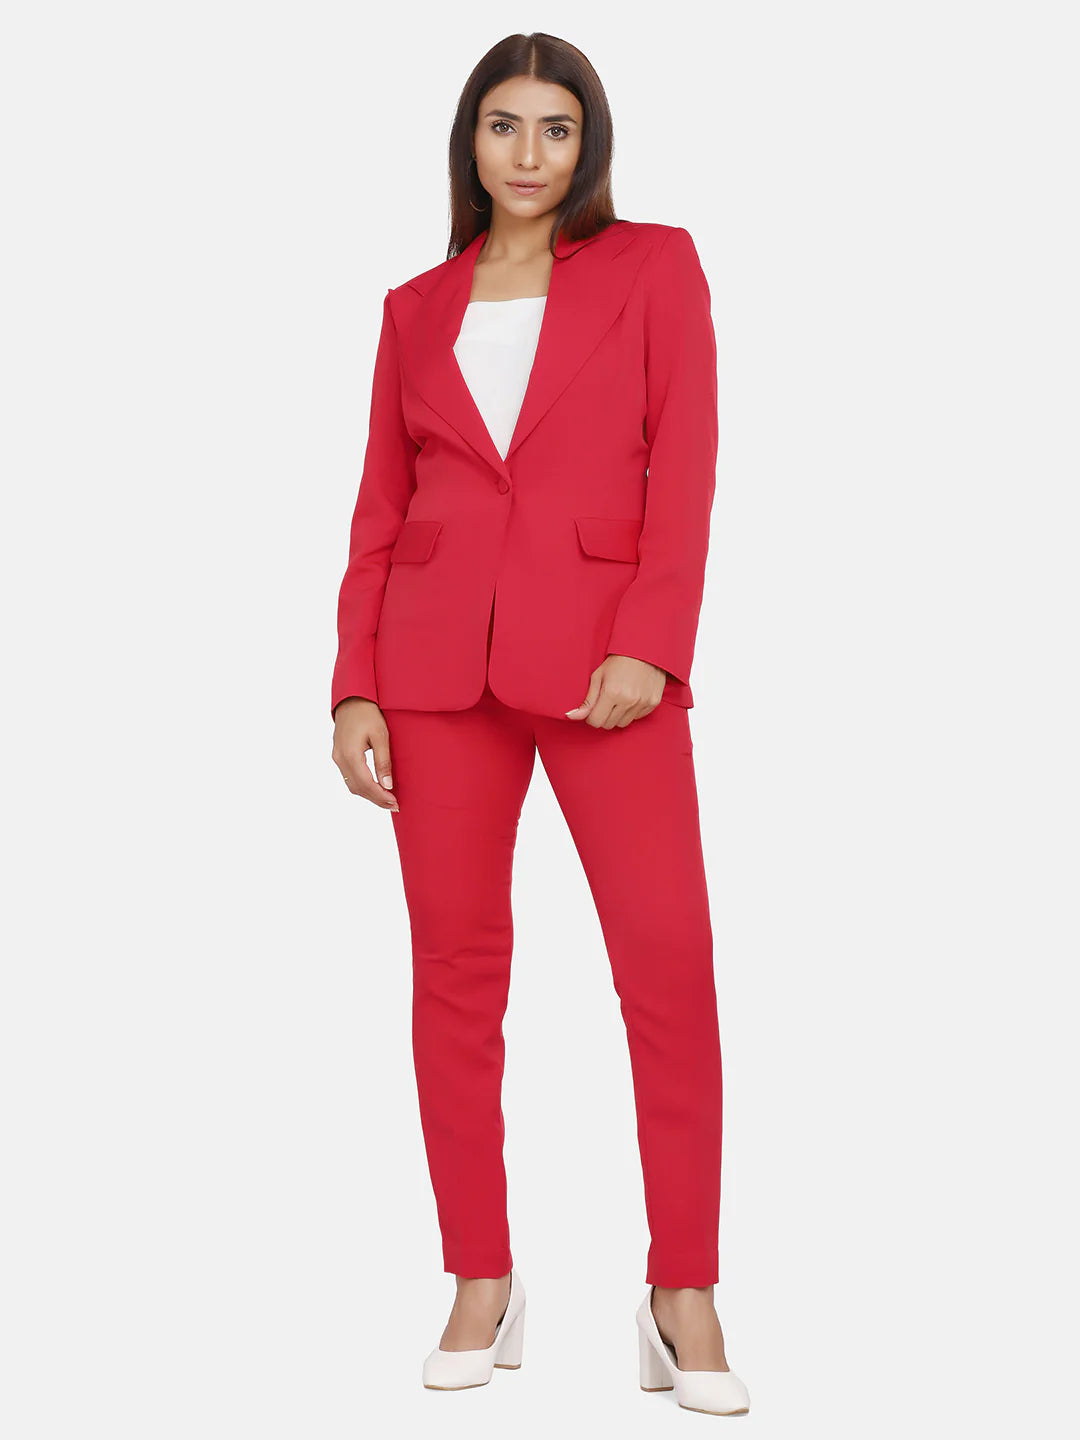 NKOOGH Dressy Pant Suits for A Wedding Winter Two Piece for Women Pants Suit  Women Fashion Casual Clothes Long Sleeve Assorted Colors Blazer High Waist  Suit Pencil Pants Women Casual Two Piece